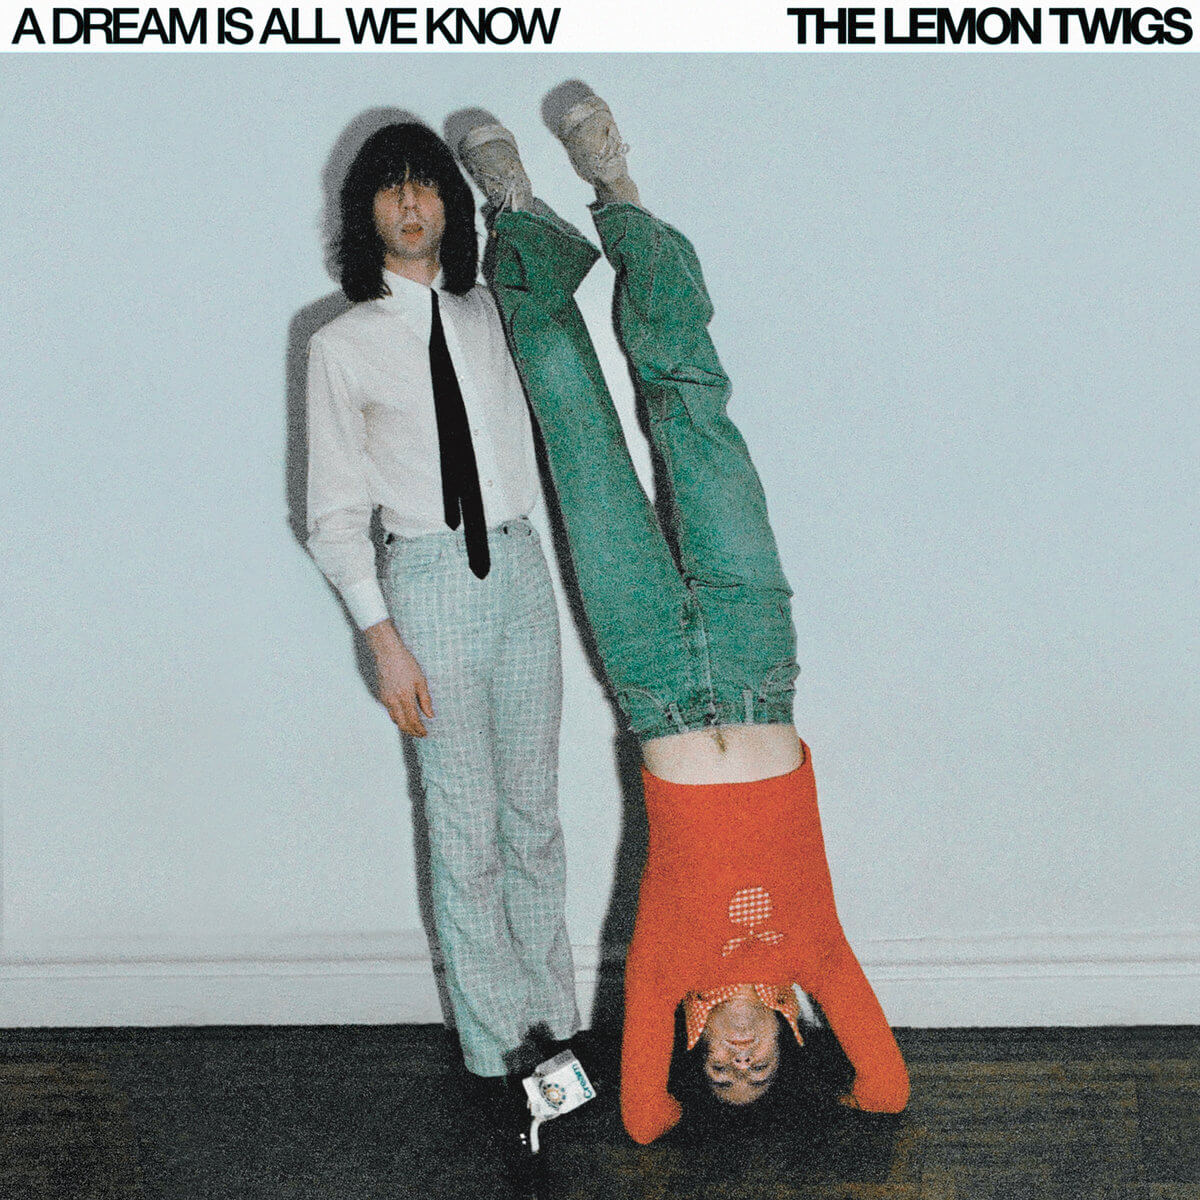 A Dream is All We Know by The Lemon Twigs album review by David Saxum for Northern Transmissions. The duo's LP is now out on Captured Tracks